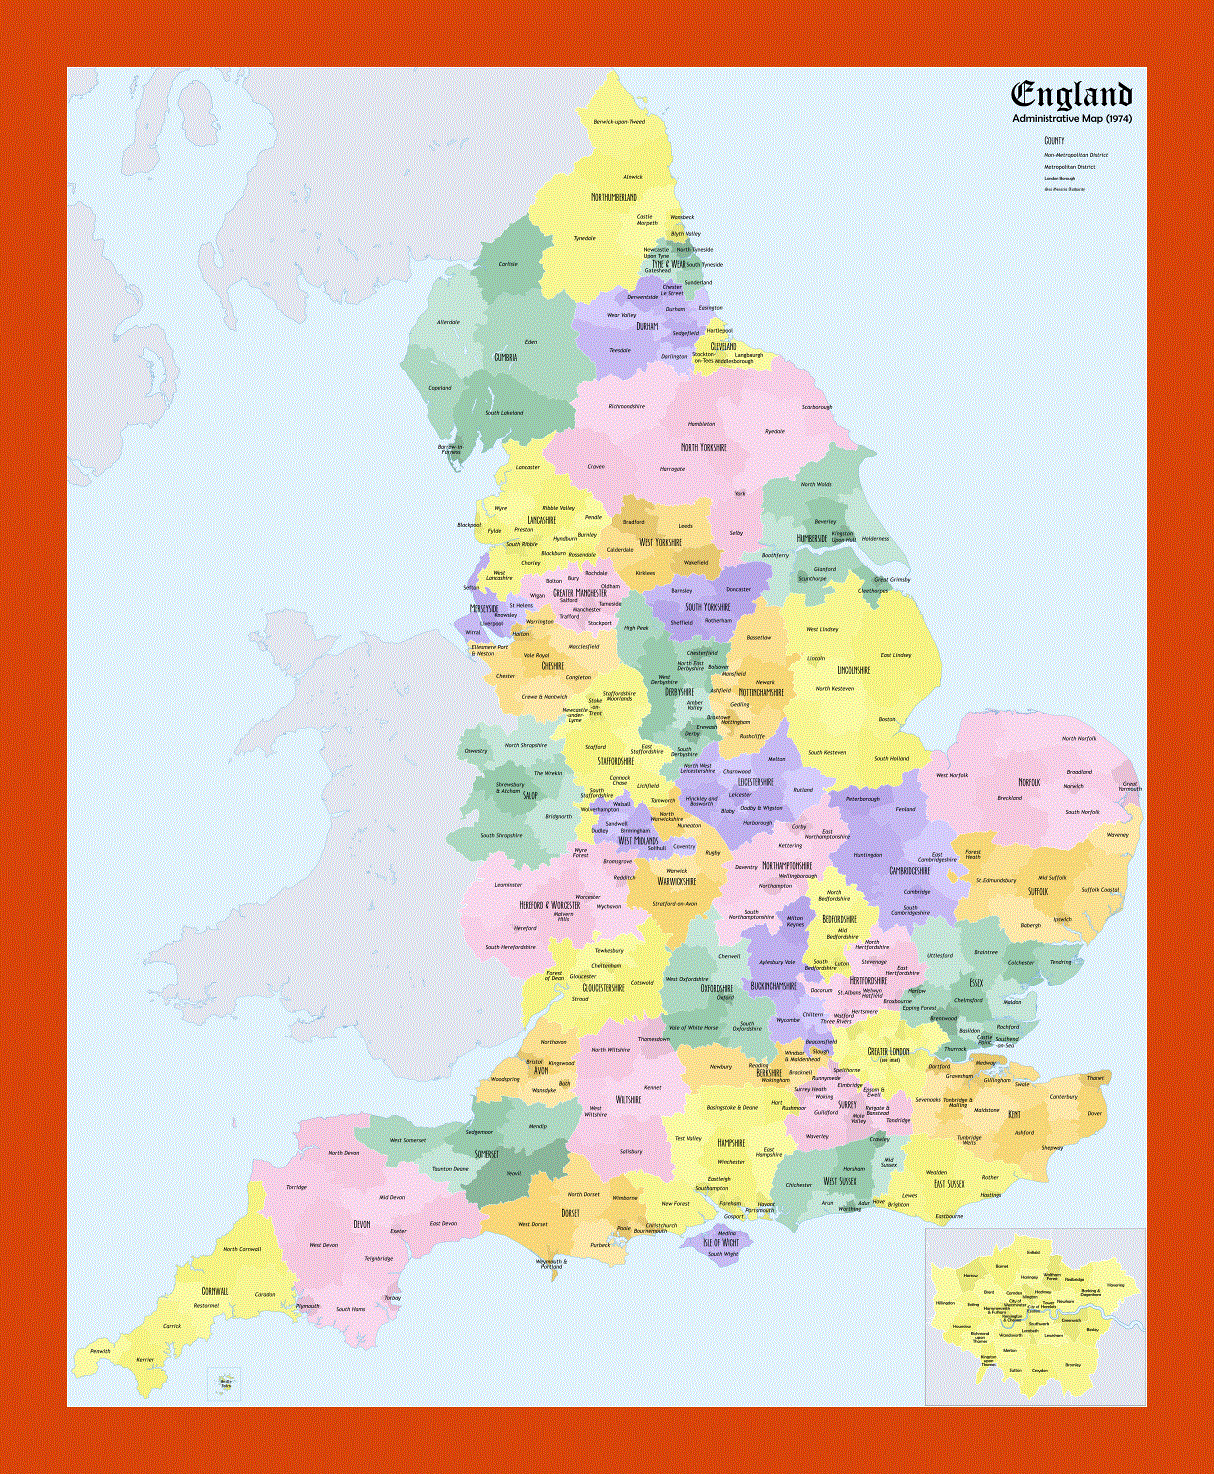 Administrative map of England - 1974